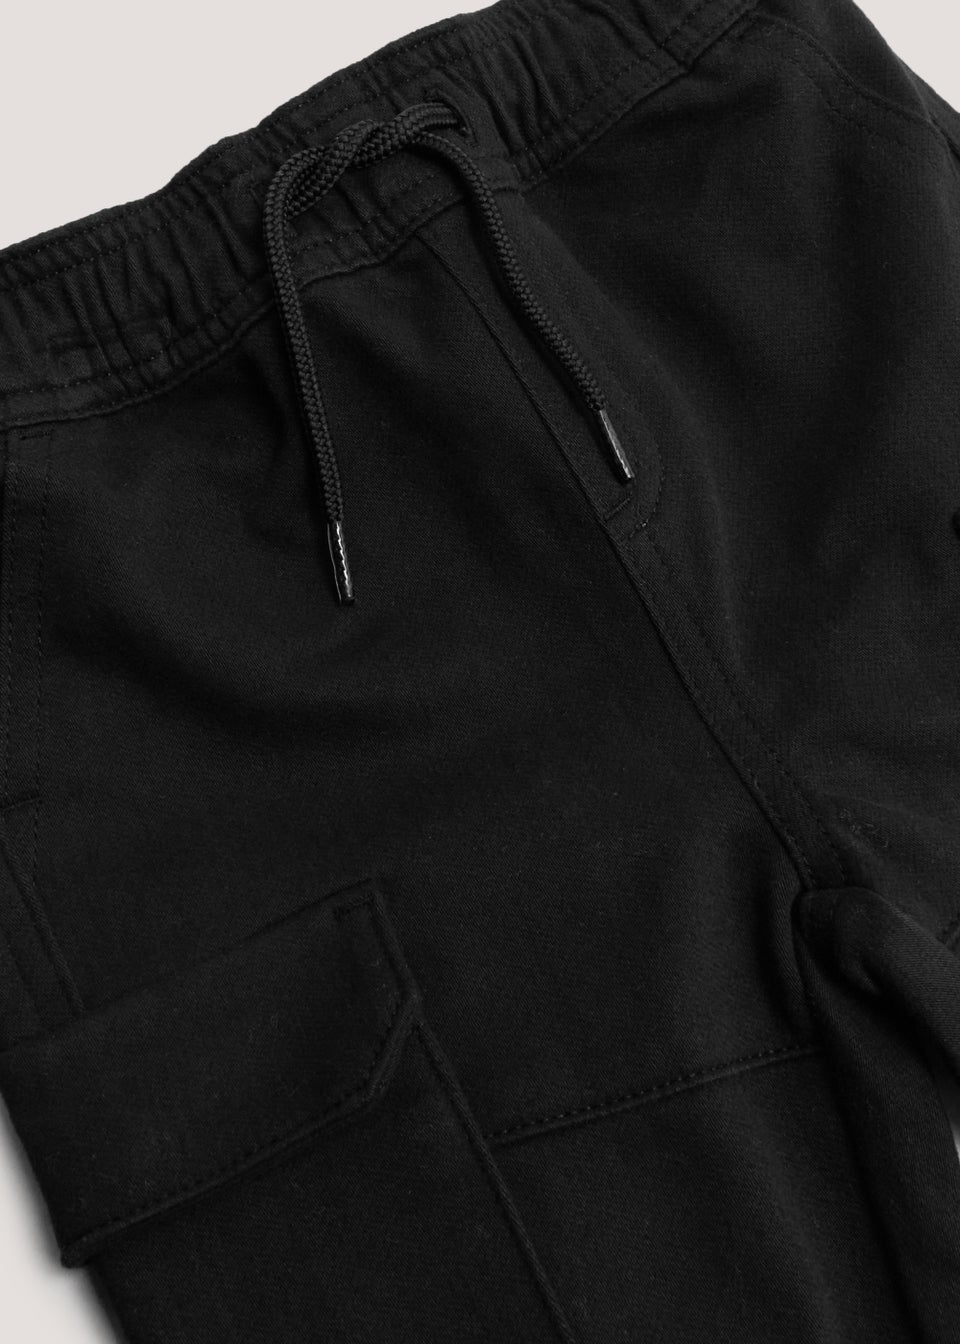 Boys Black Knitted Cargo Trousers (9mths-6yrs) - Matalan